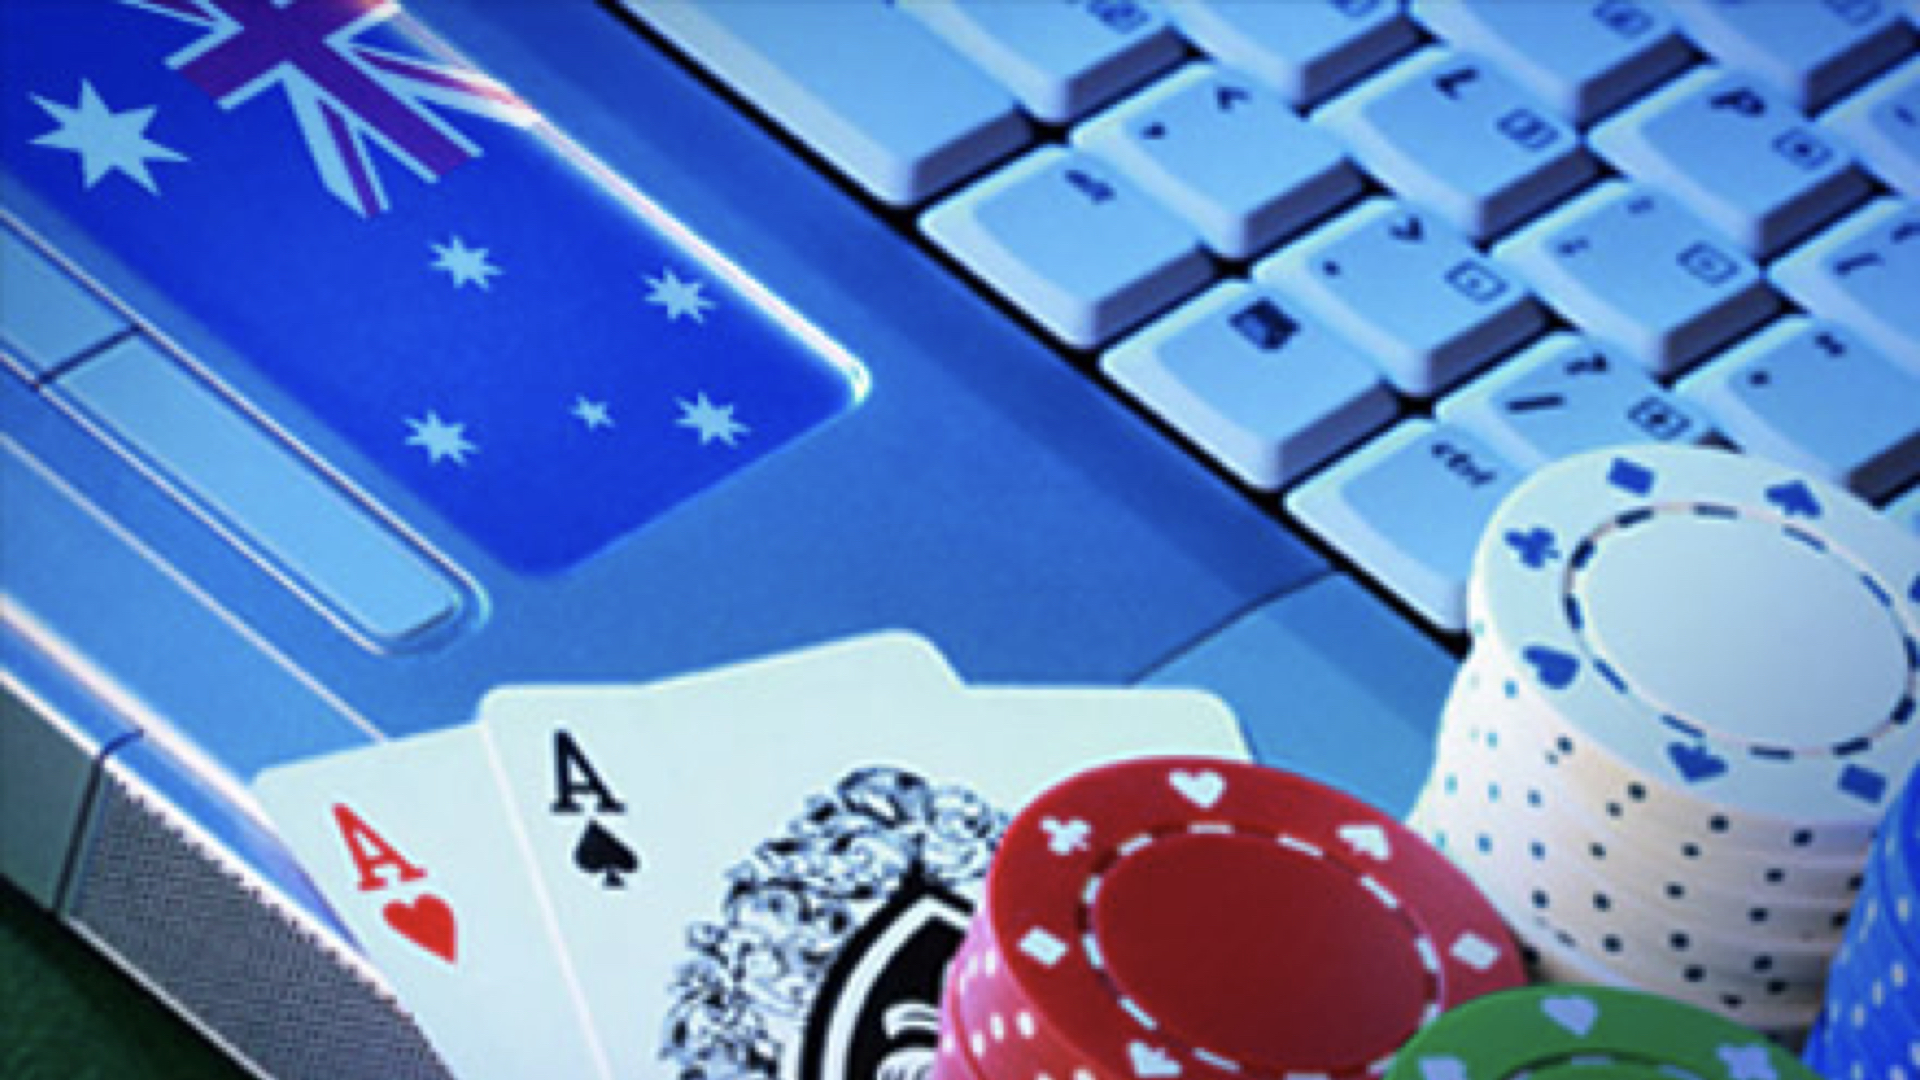 Here Is A Quick Cure For online casino